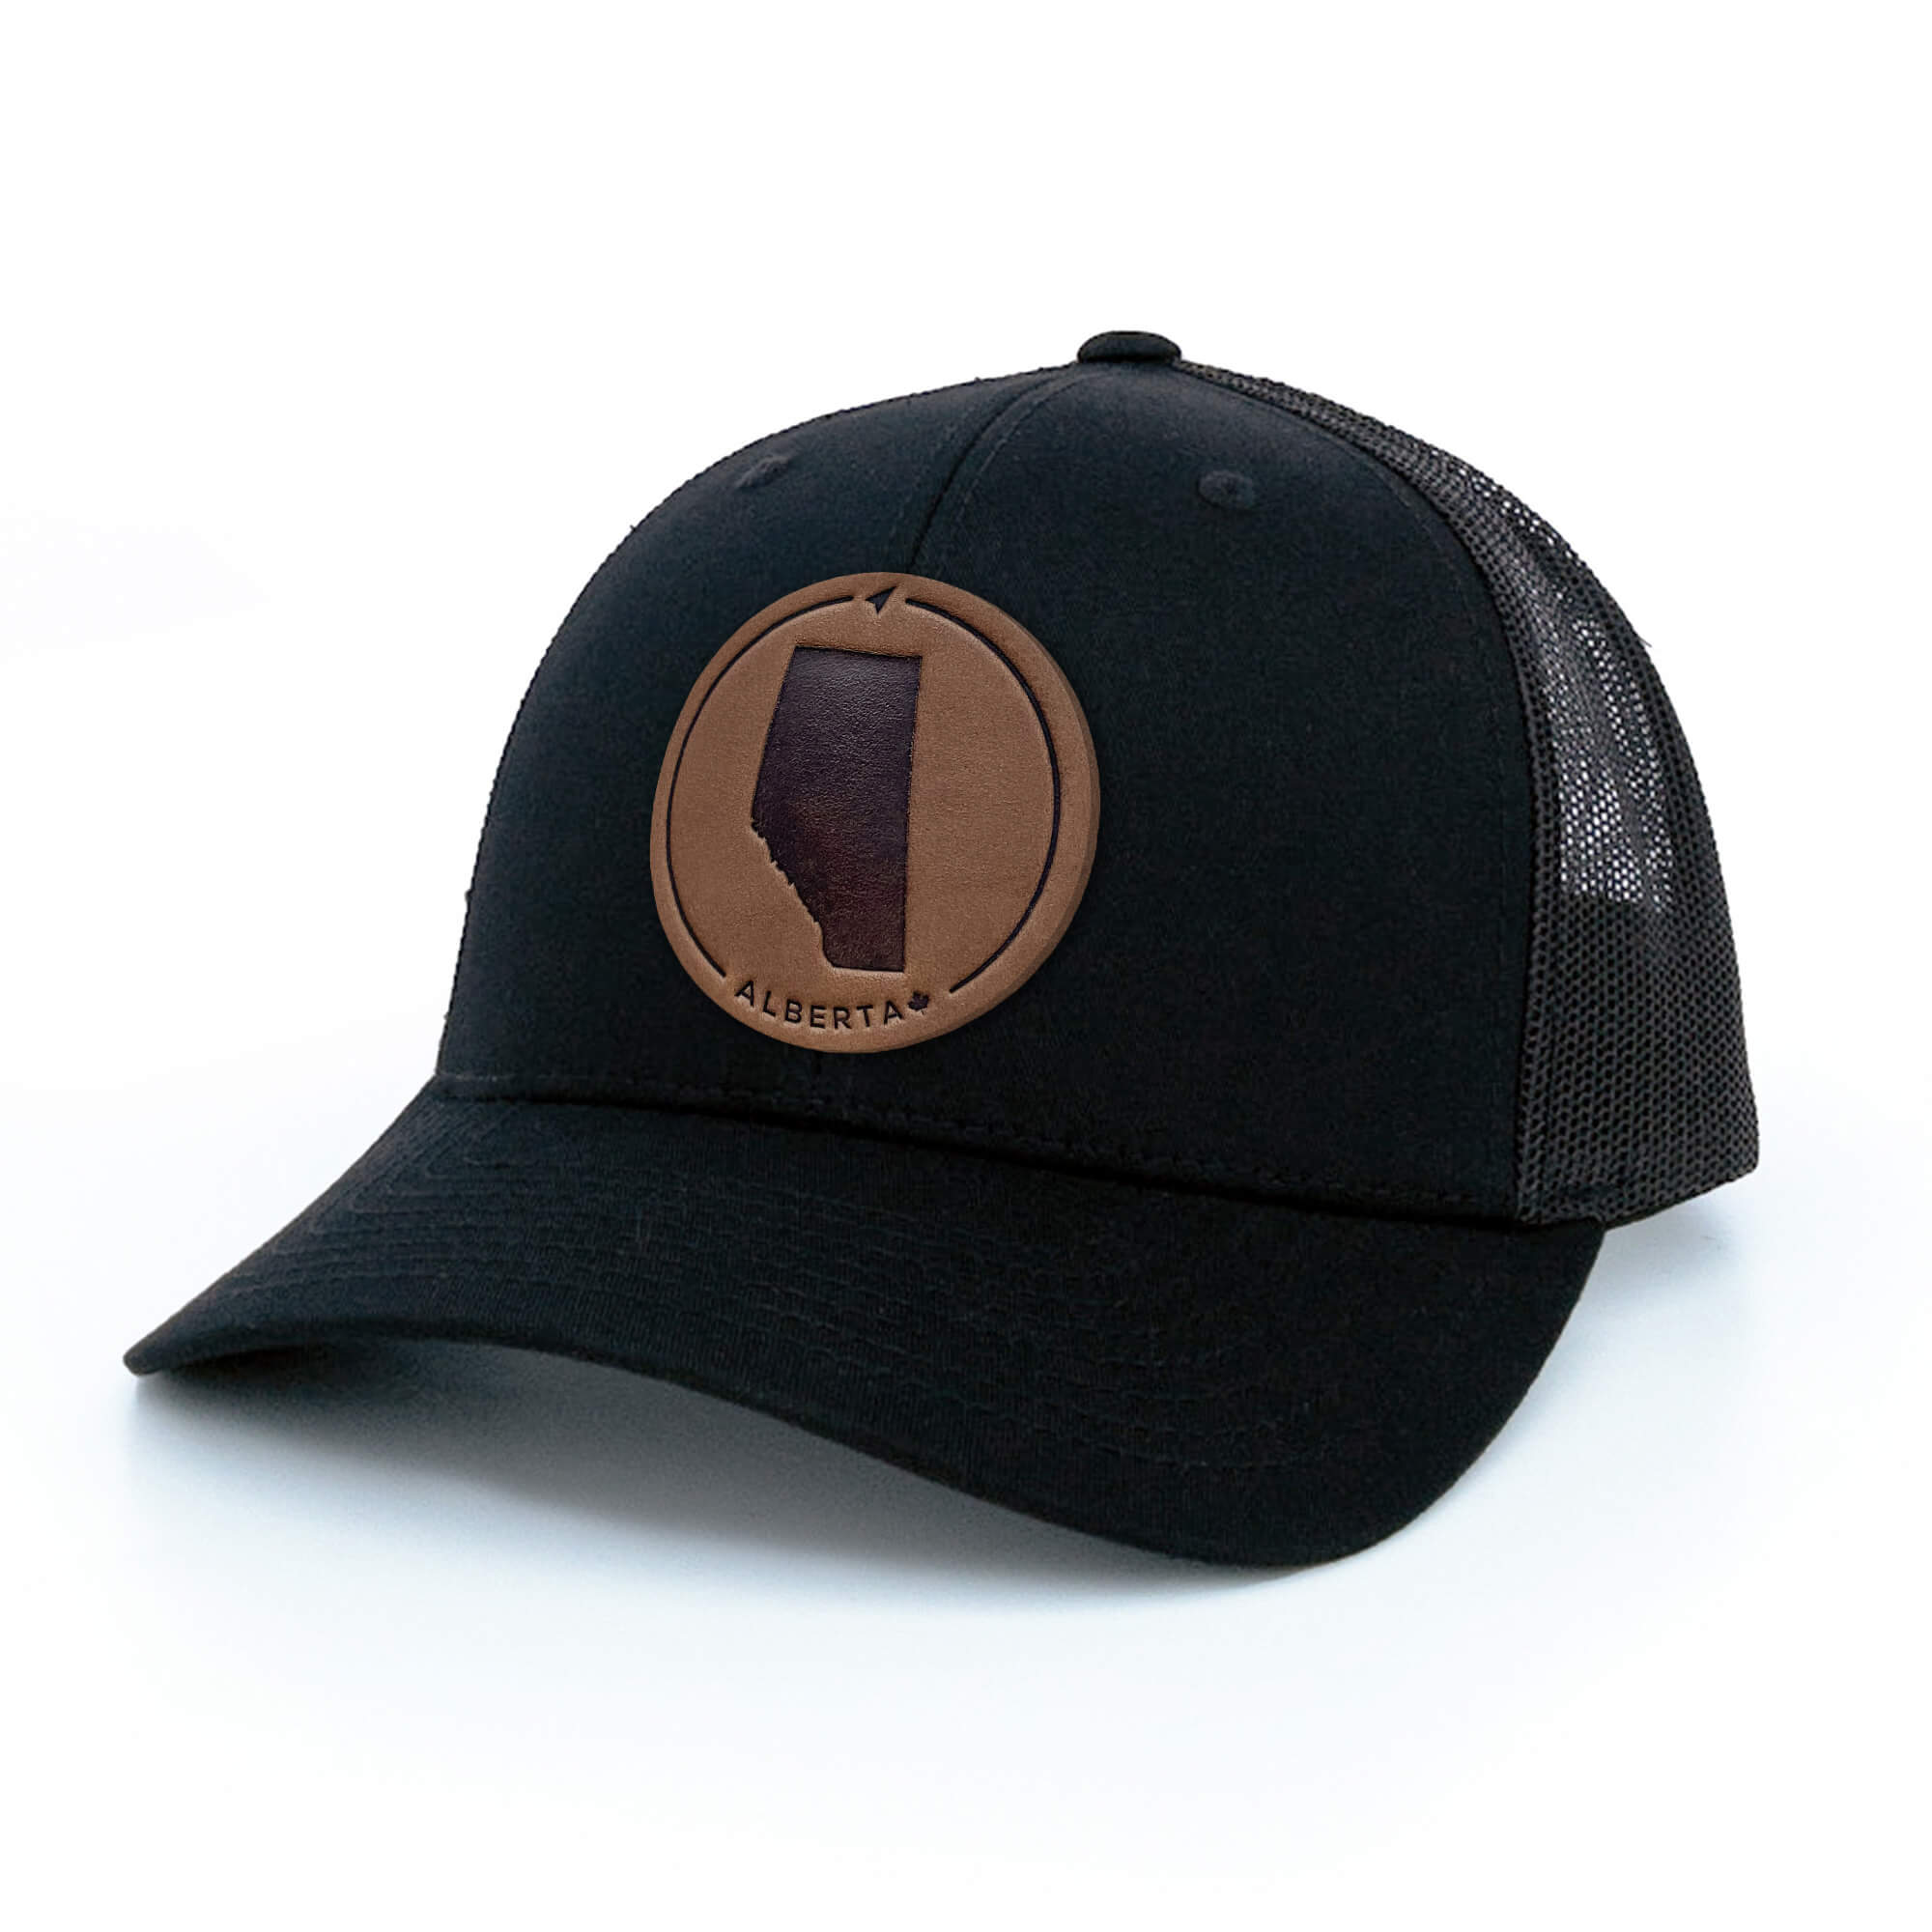 Black trucker hat with full-grain leather patch of Alberta | BLACK-002-005, CHARC-002-005, NAVY-002-005, HGREY-002-005, MOSS-002-005, BROWN-002-005